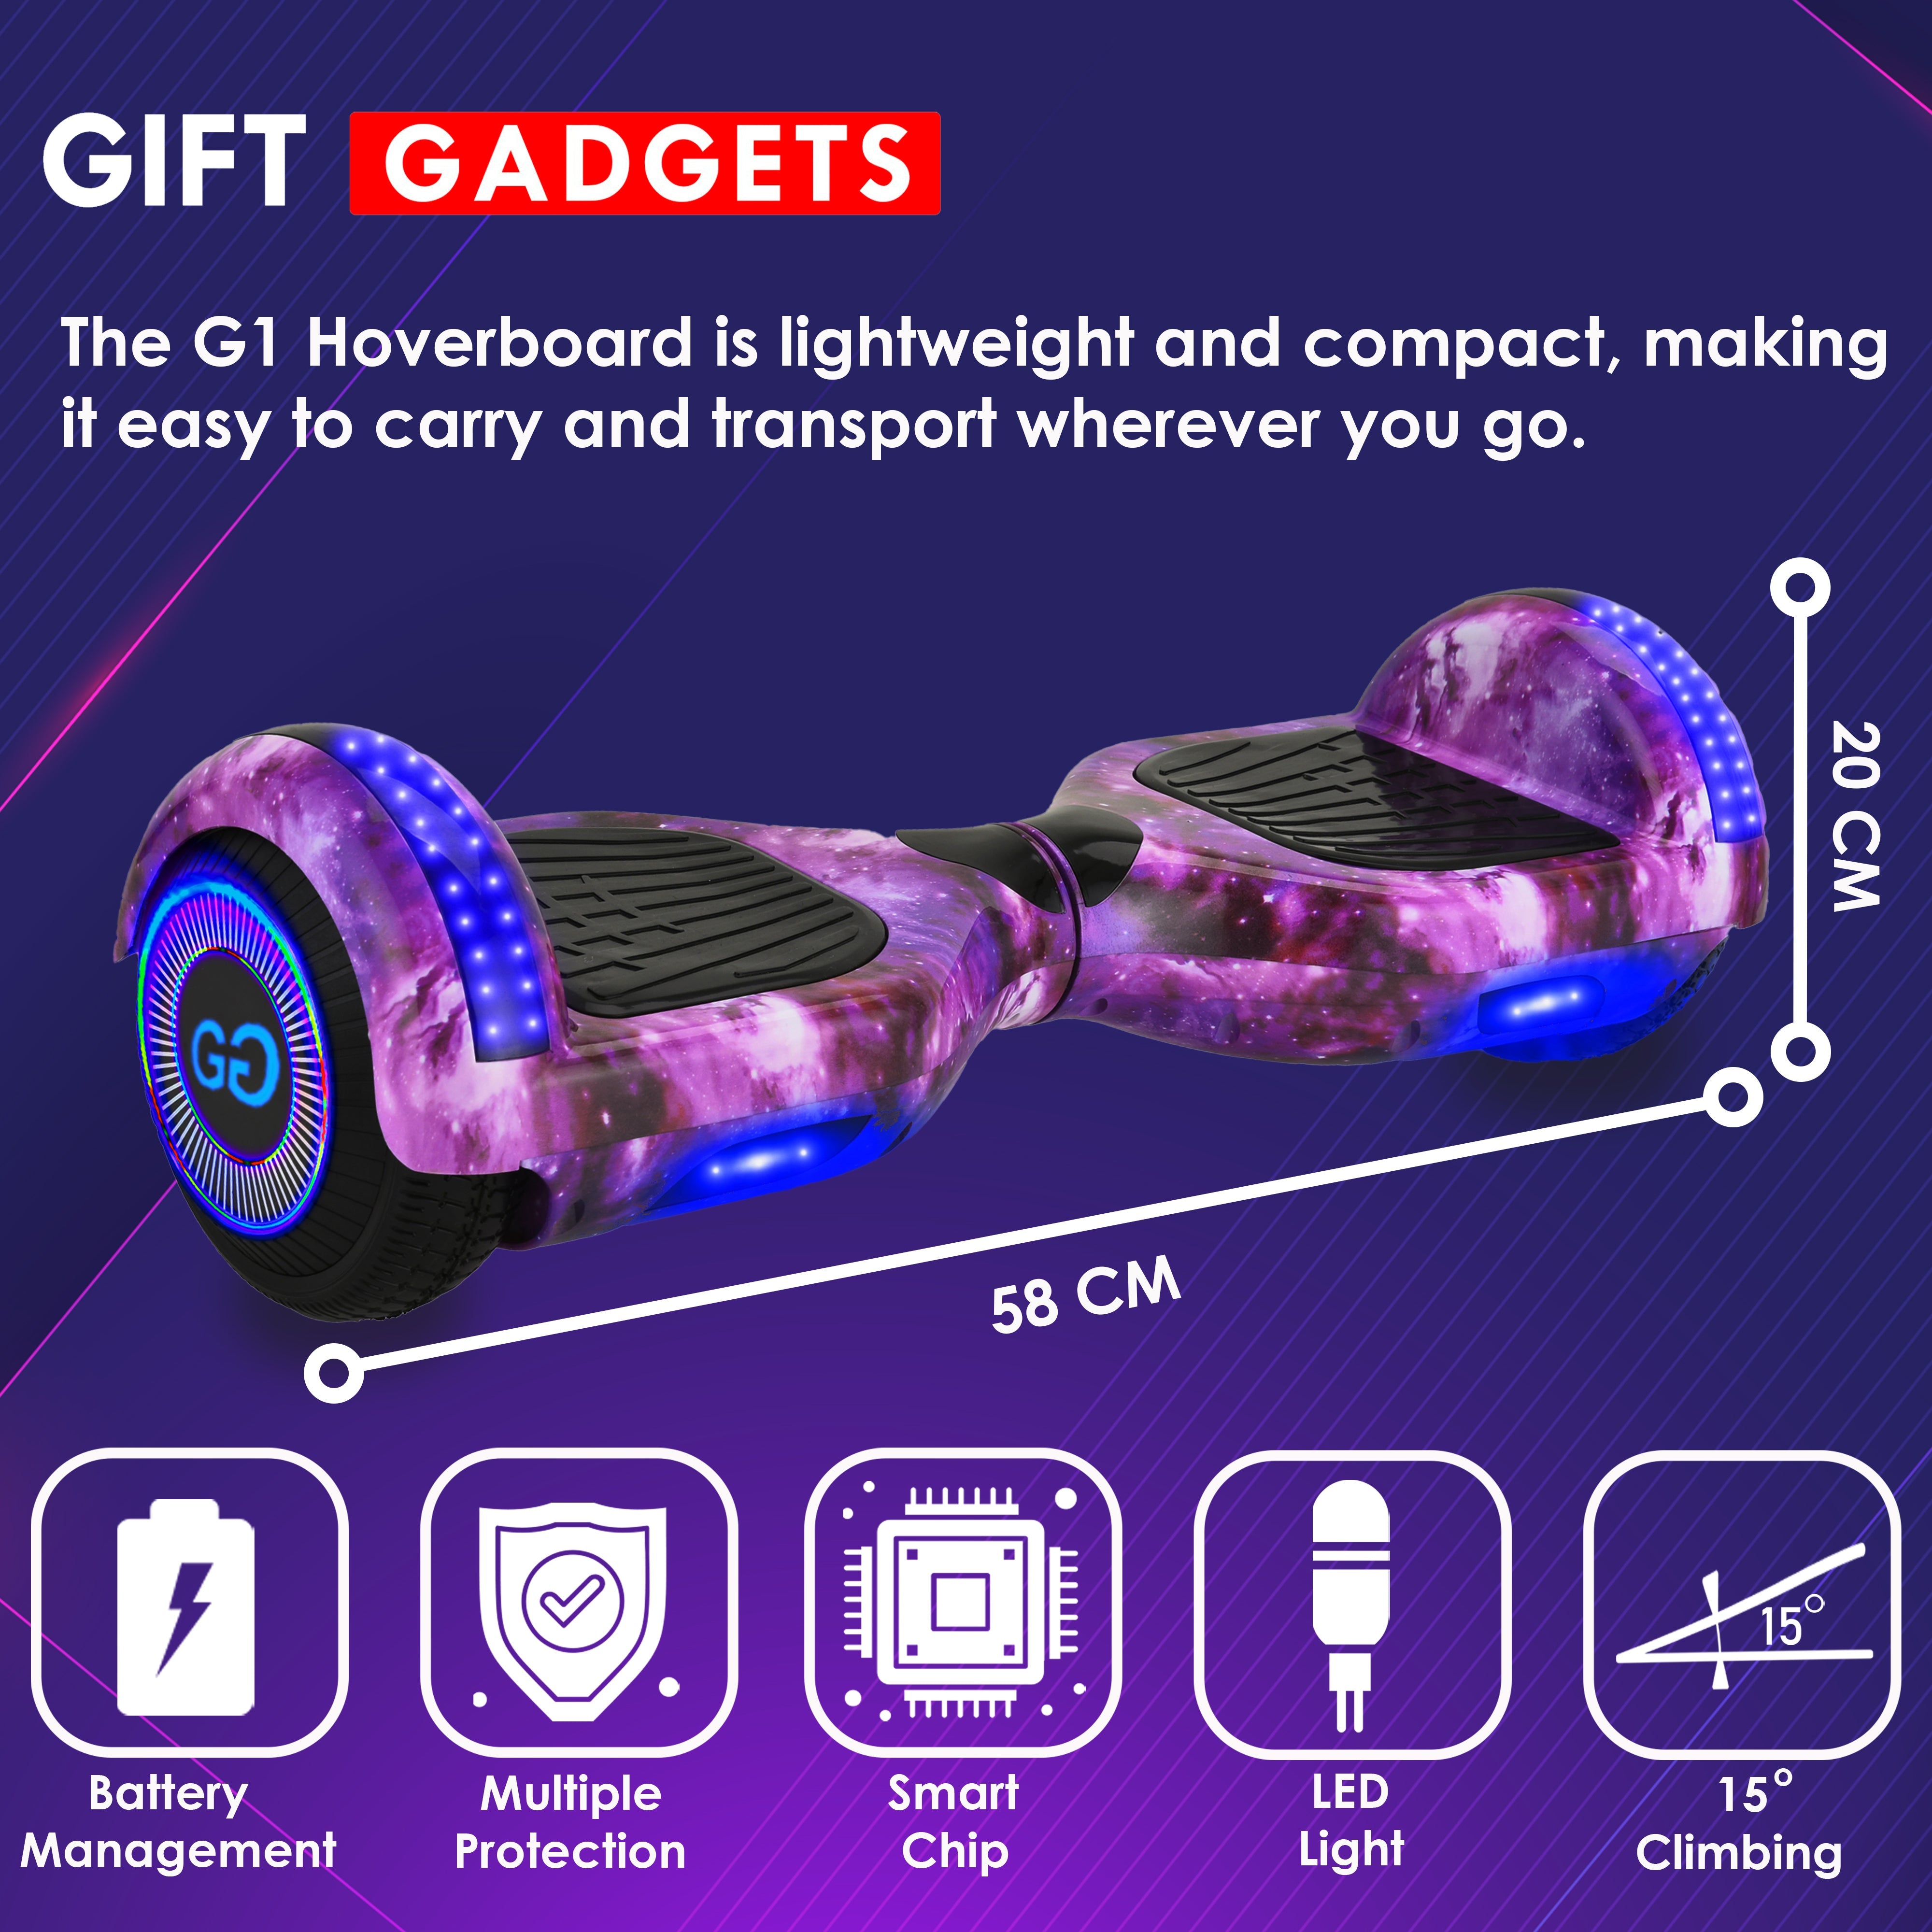 Purple Galaxy  Hoverboard with LED lights, highlighting features like battery management, multiple protection, smart chip, and a 15-degree climbing ability.